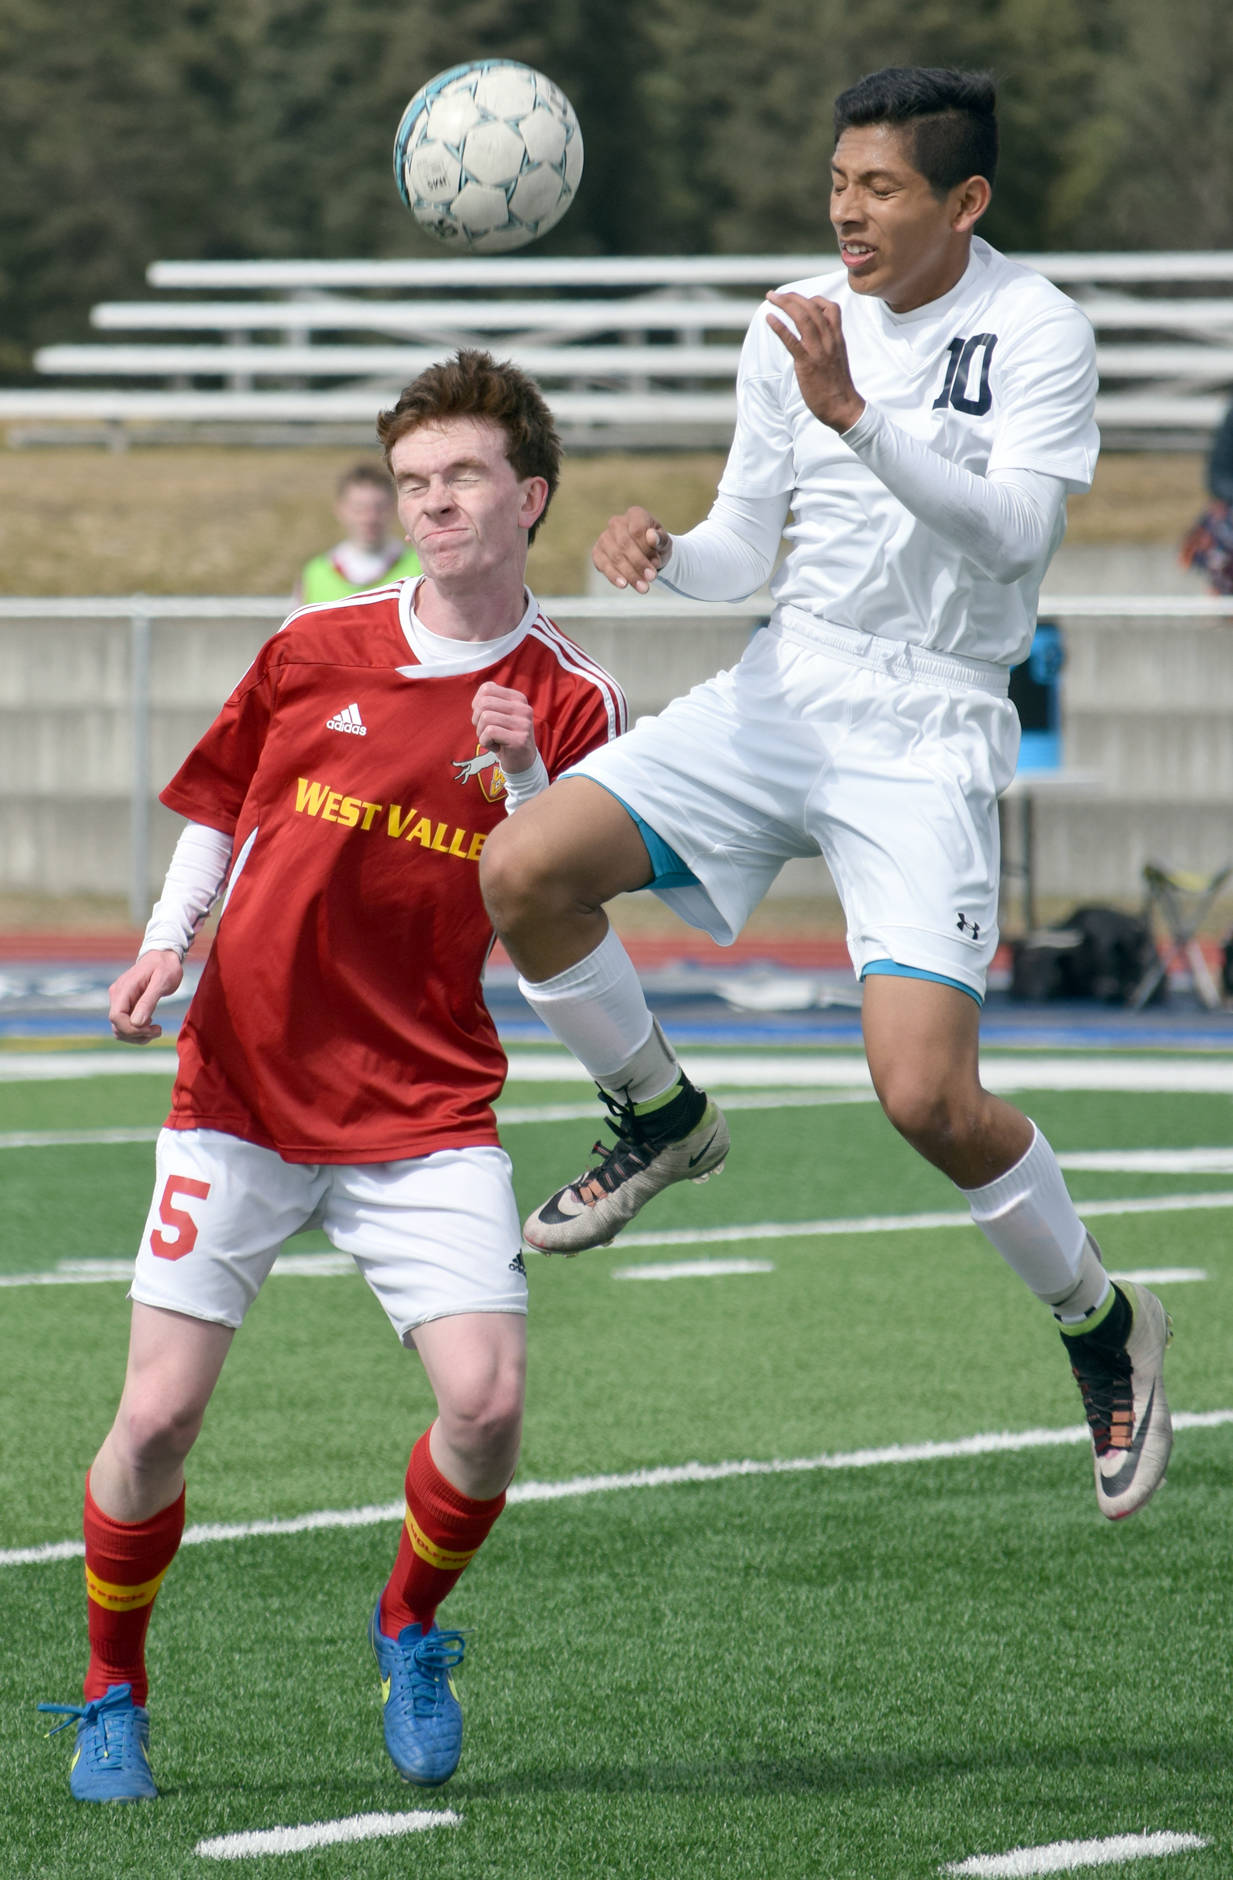 West Valley’s Sean Cadigan and Soldotna’s Alex Montague challenge for the ball Friday, April 28, 2017, at Soldotna High School. (Photo by Jeff Helminiak/Peninsula Clarion)